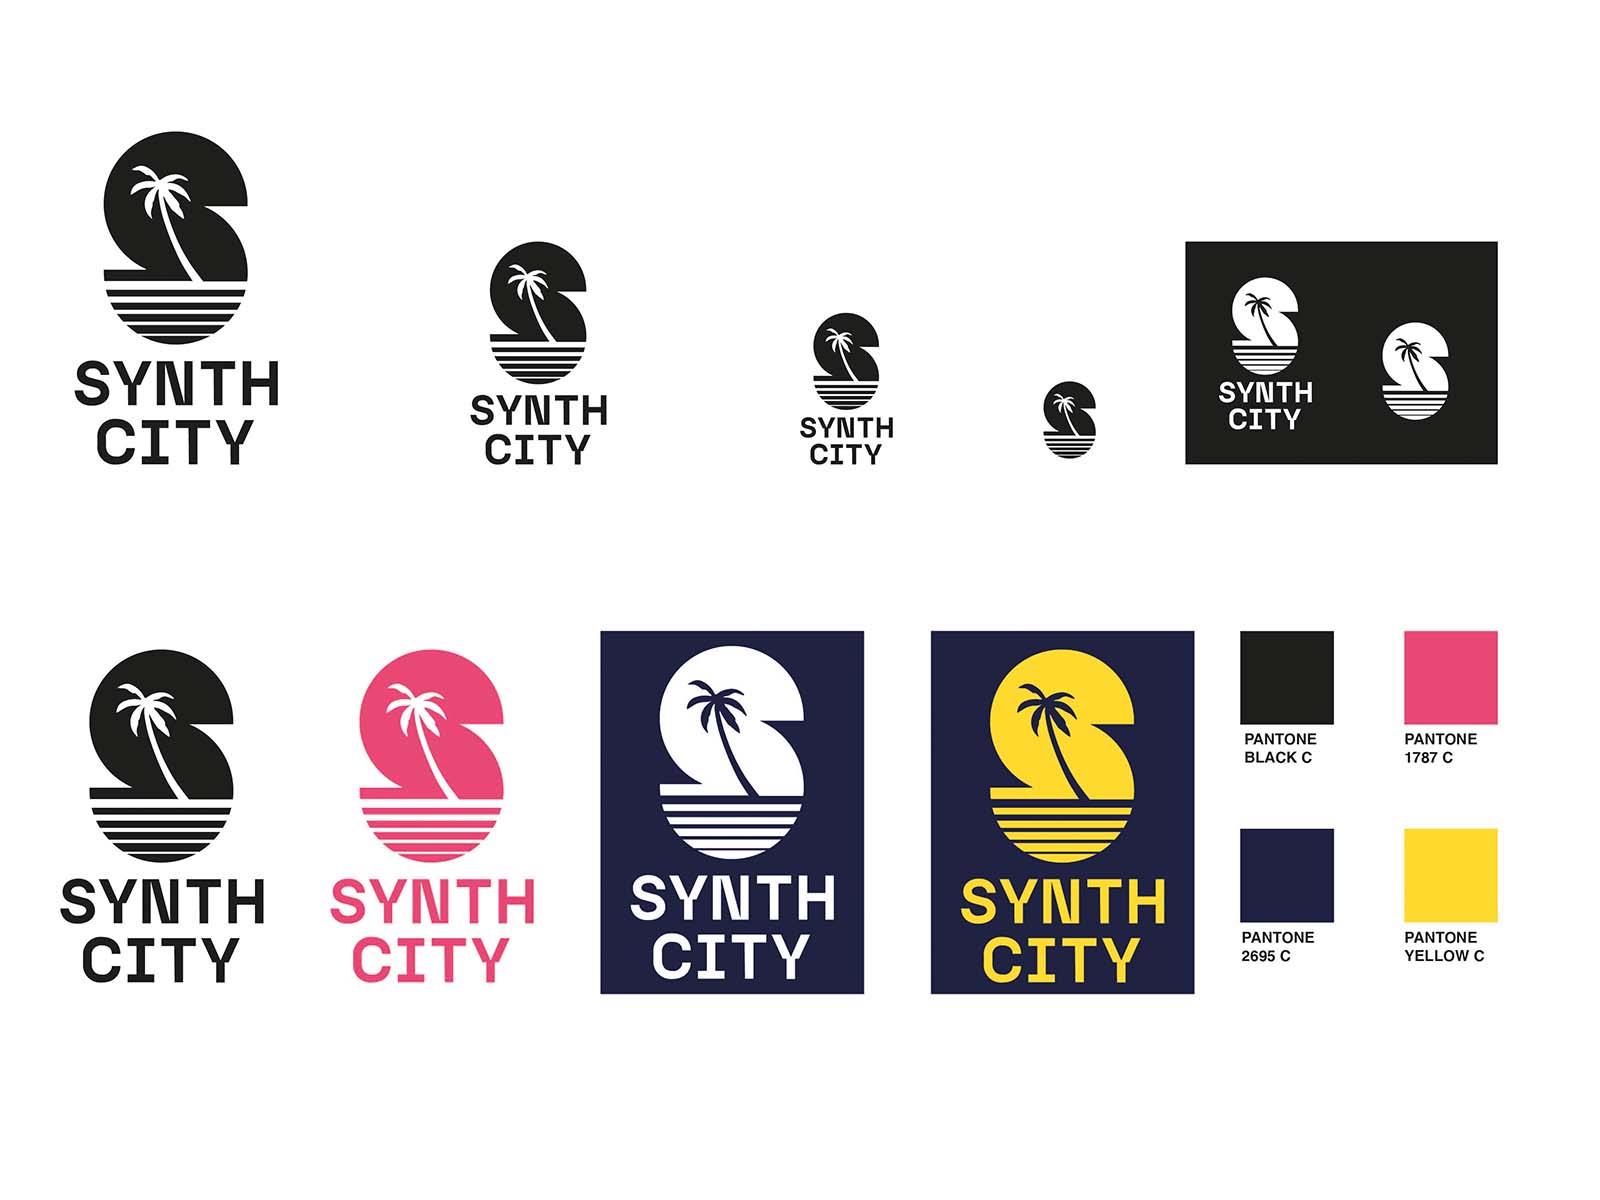 Brand board for Synthcity showing logo variations